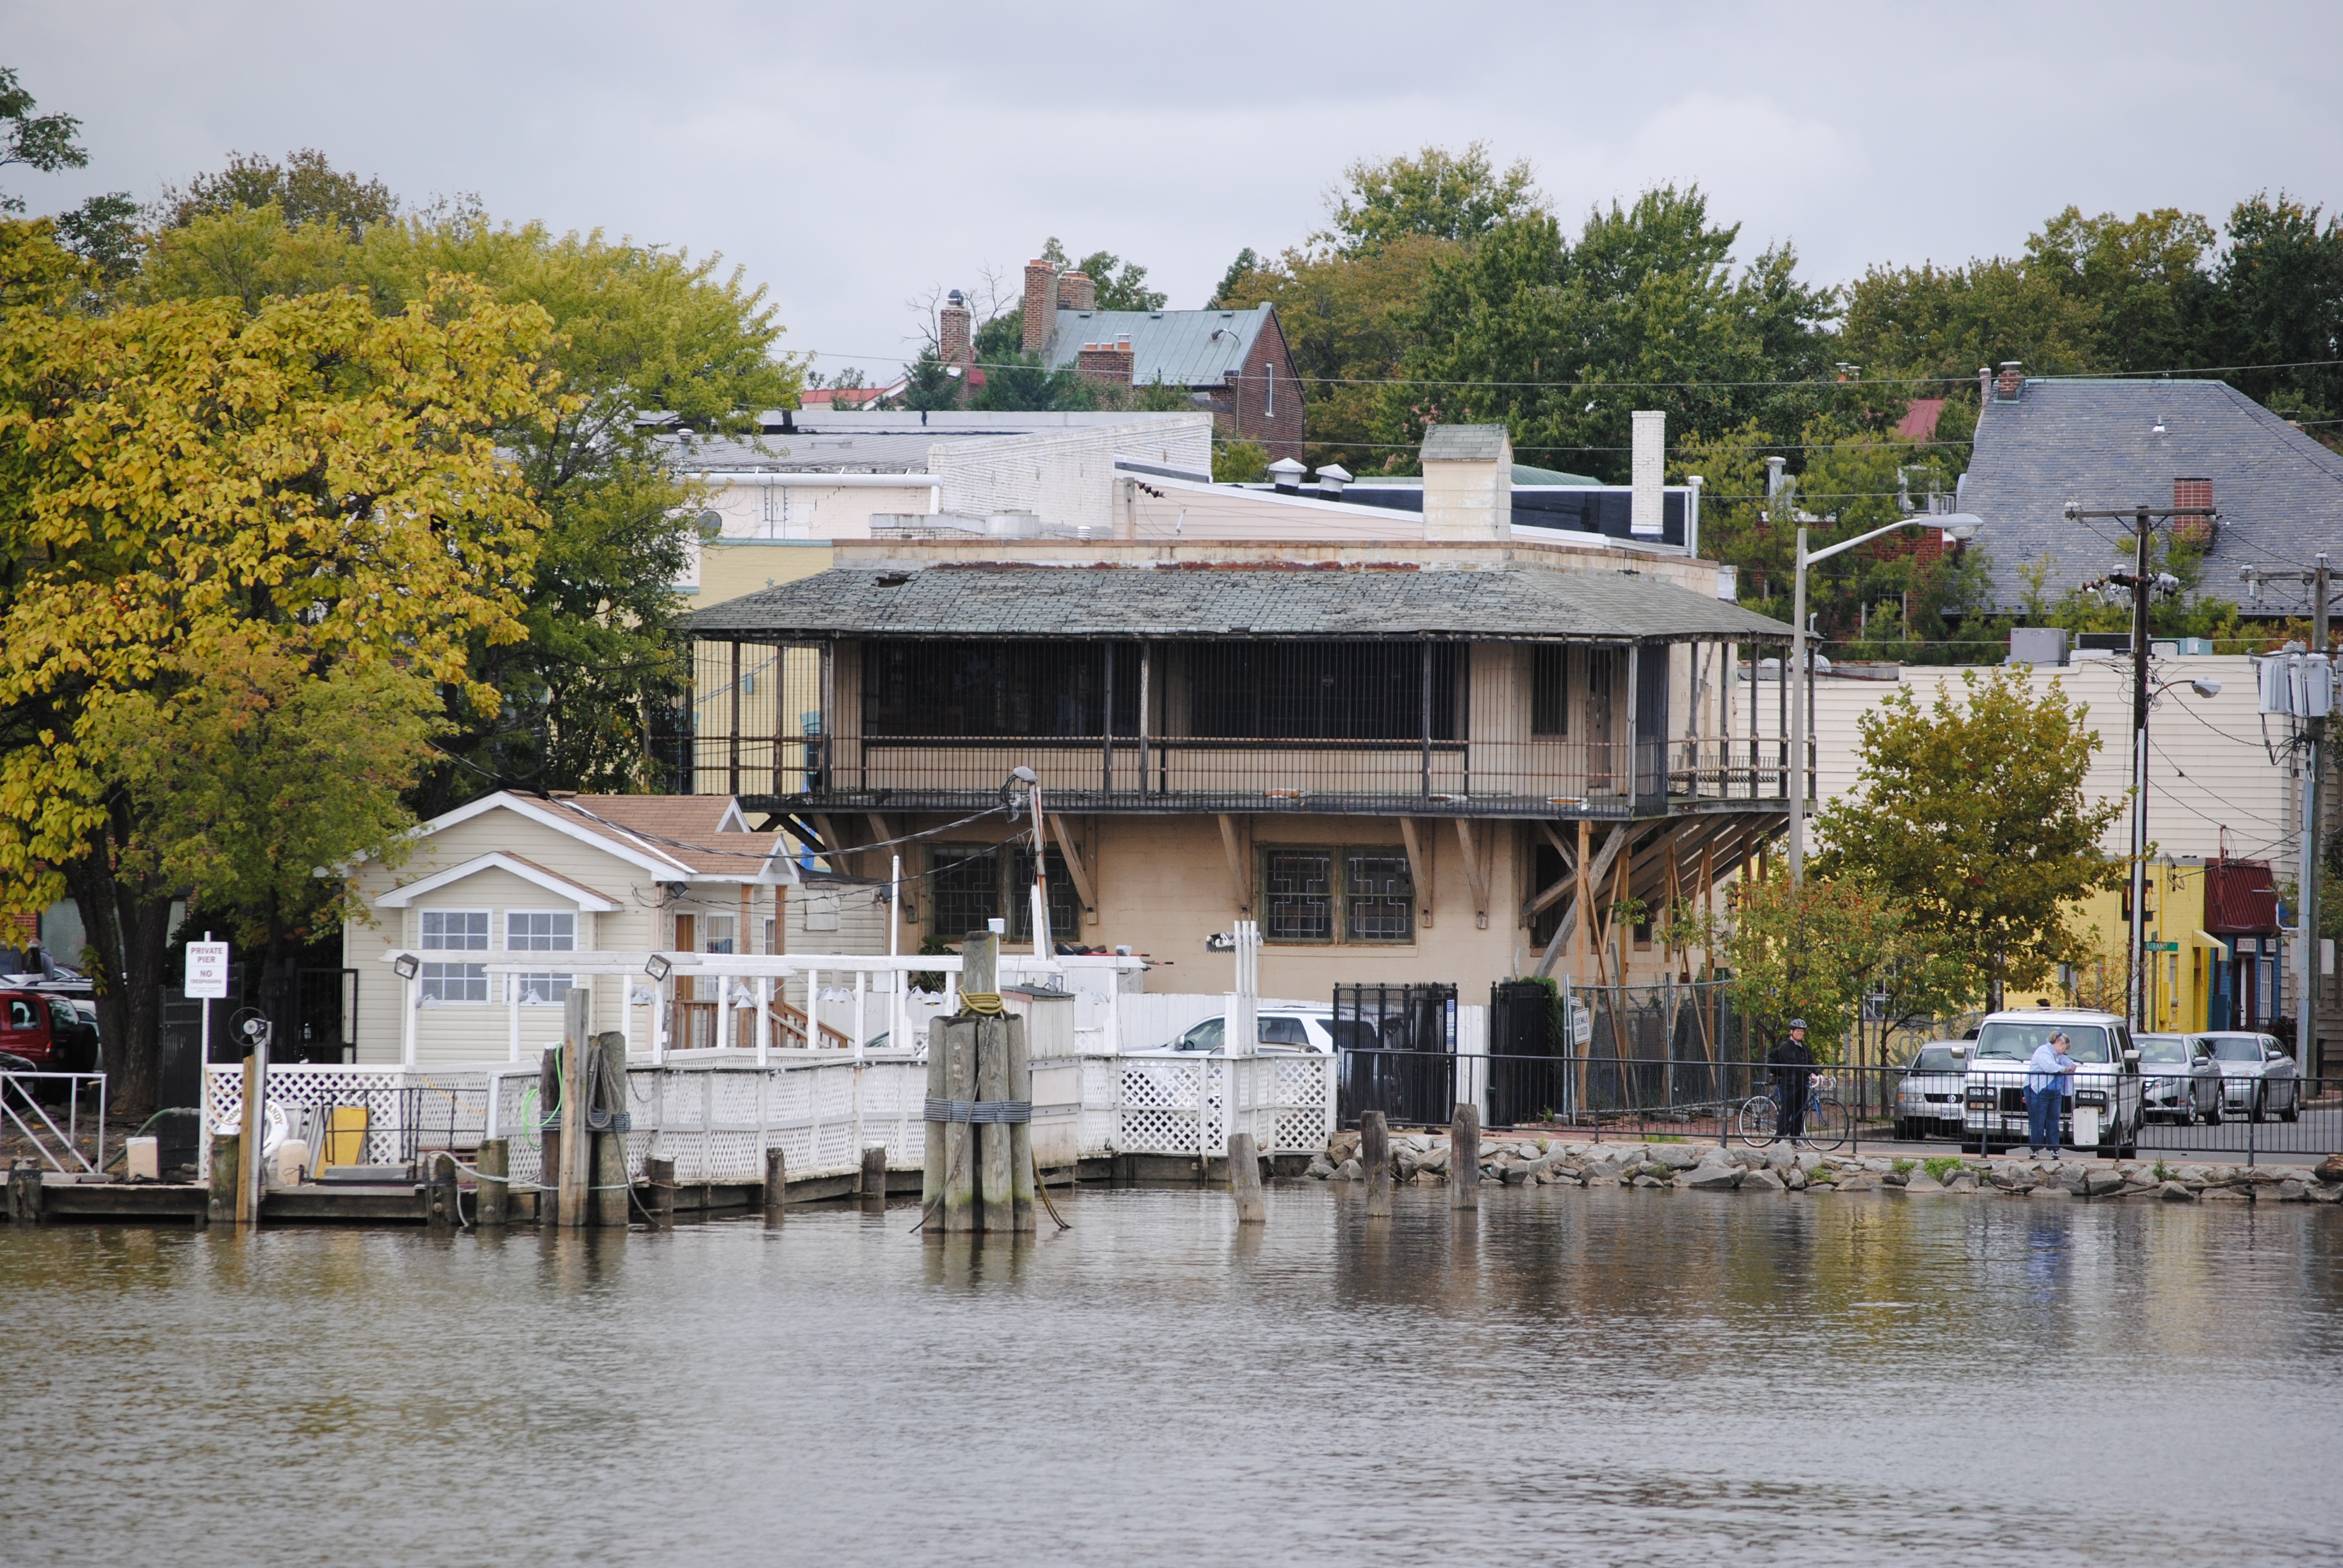 Boat club membership agrees to swap land with City Hall